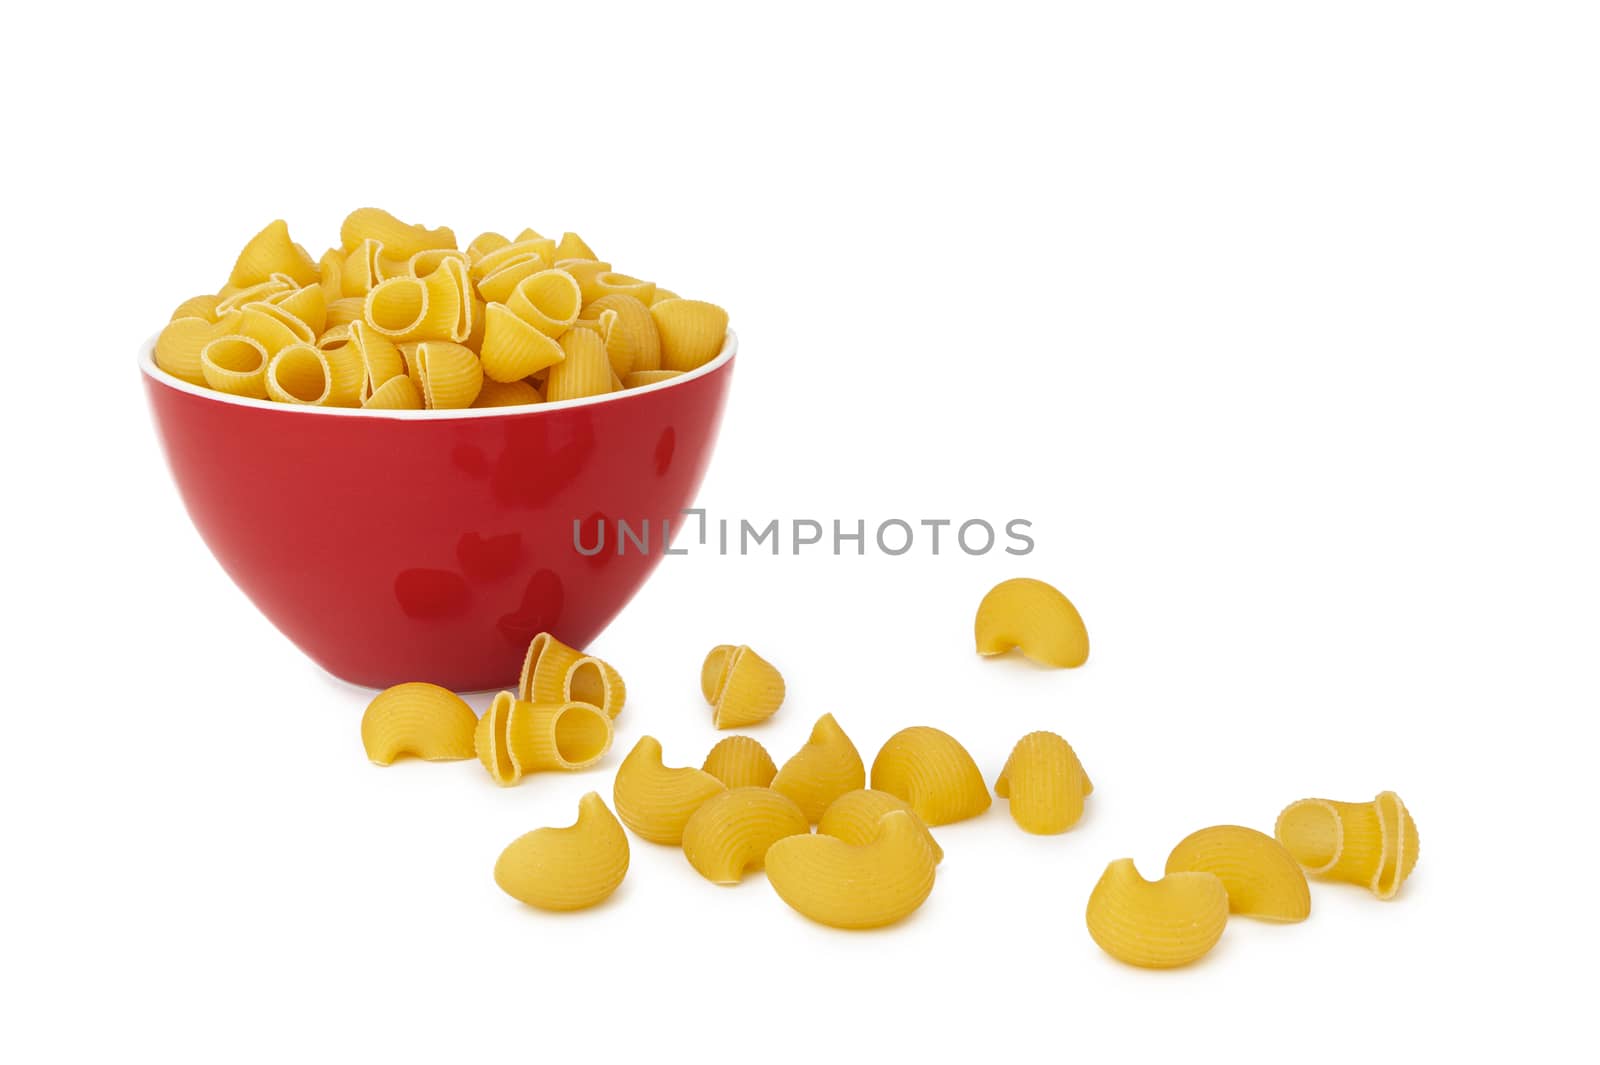 Pasta Pipe Rigate in a red bowl. Isolated on a white background